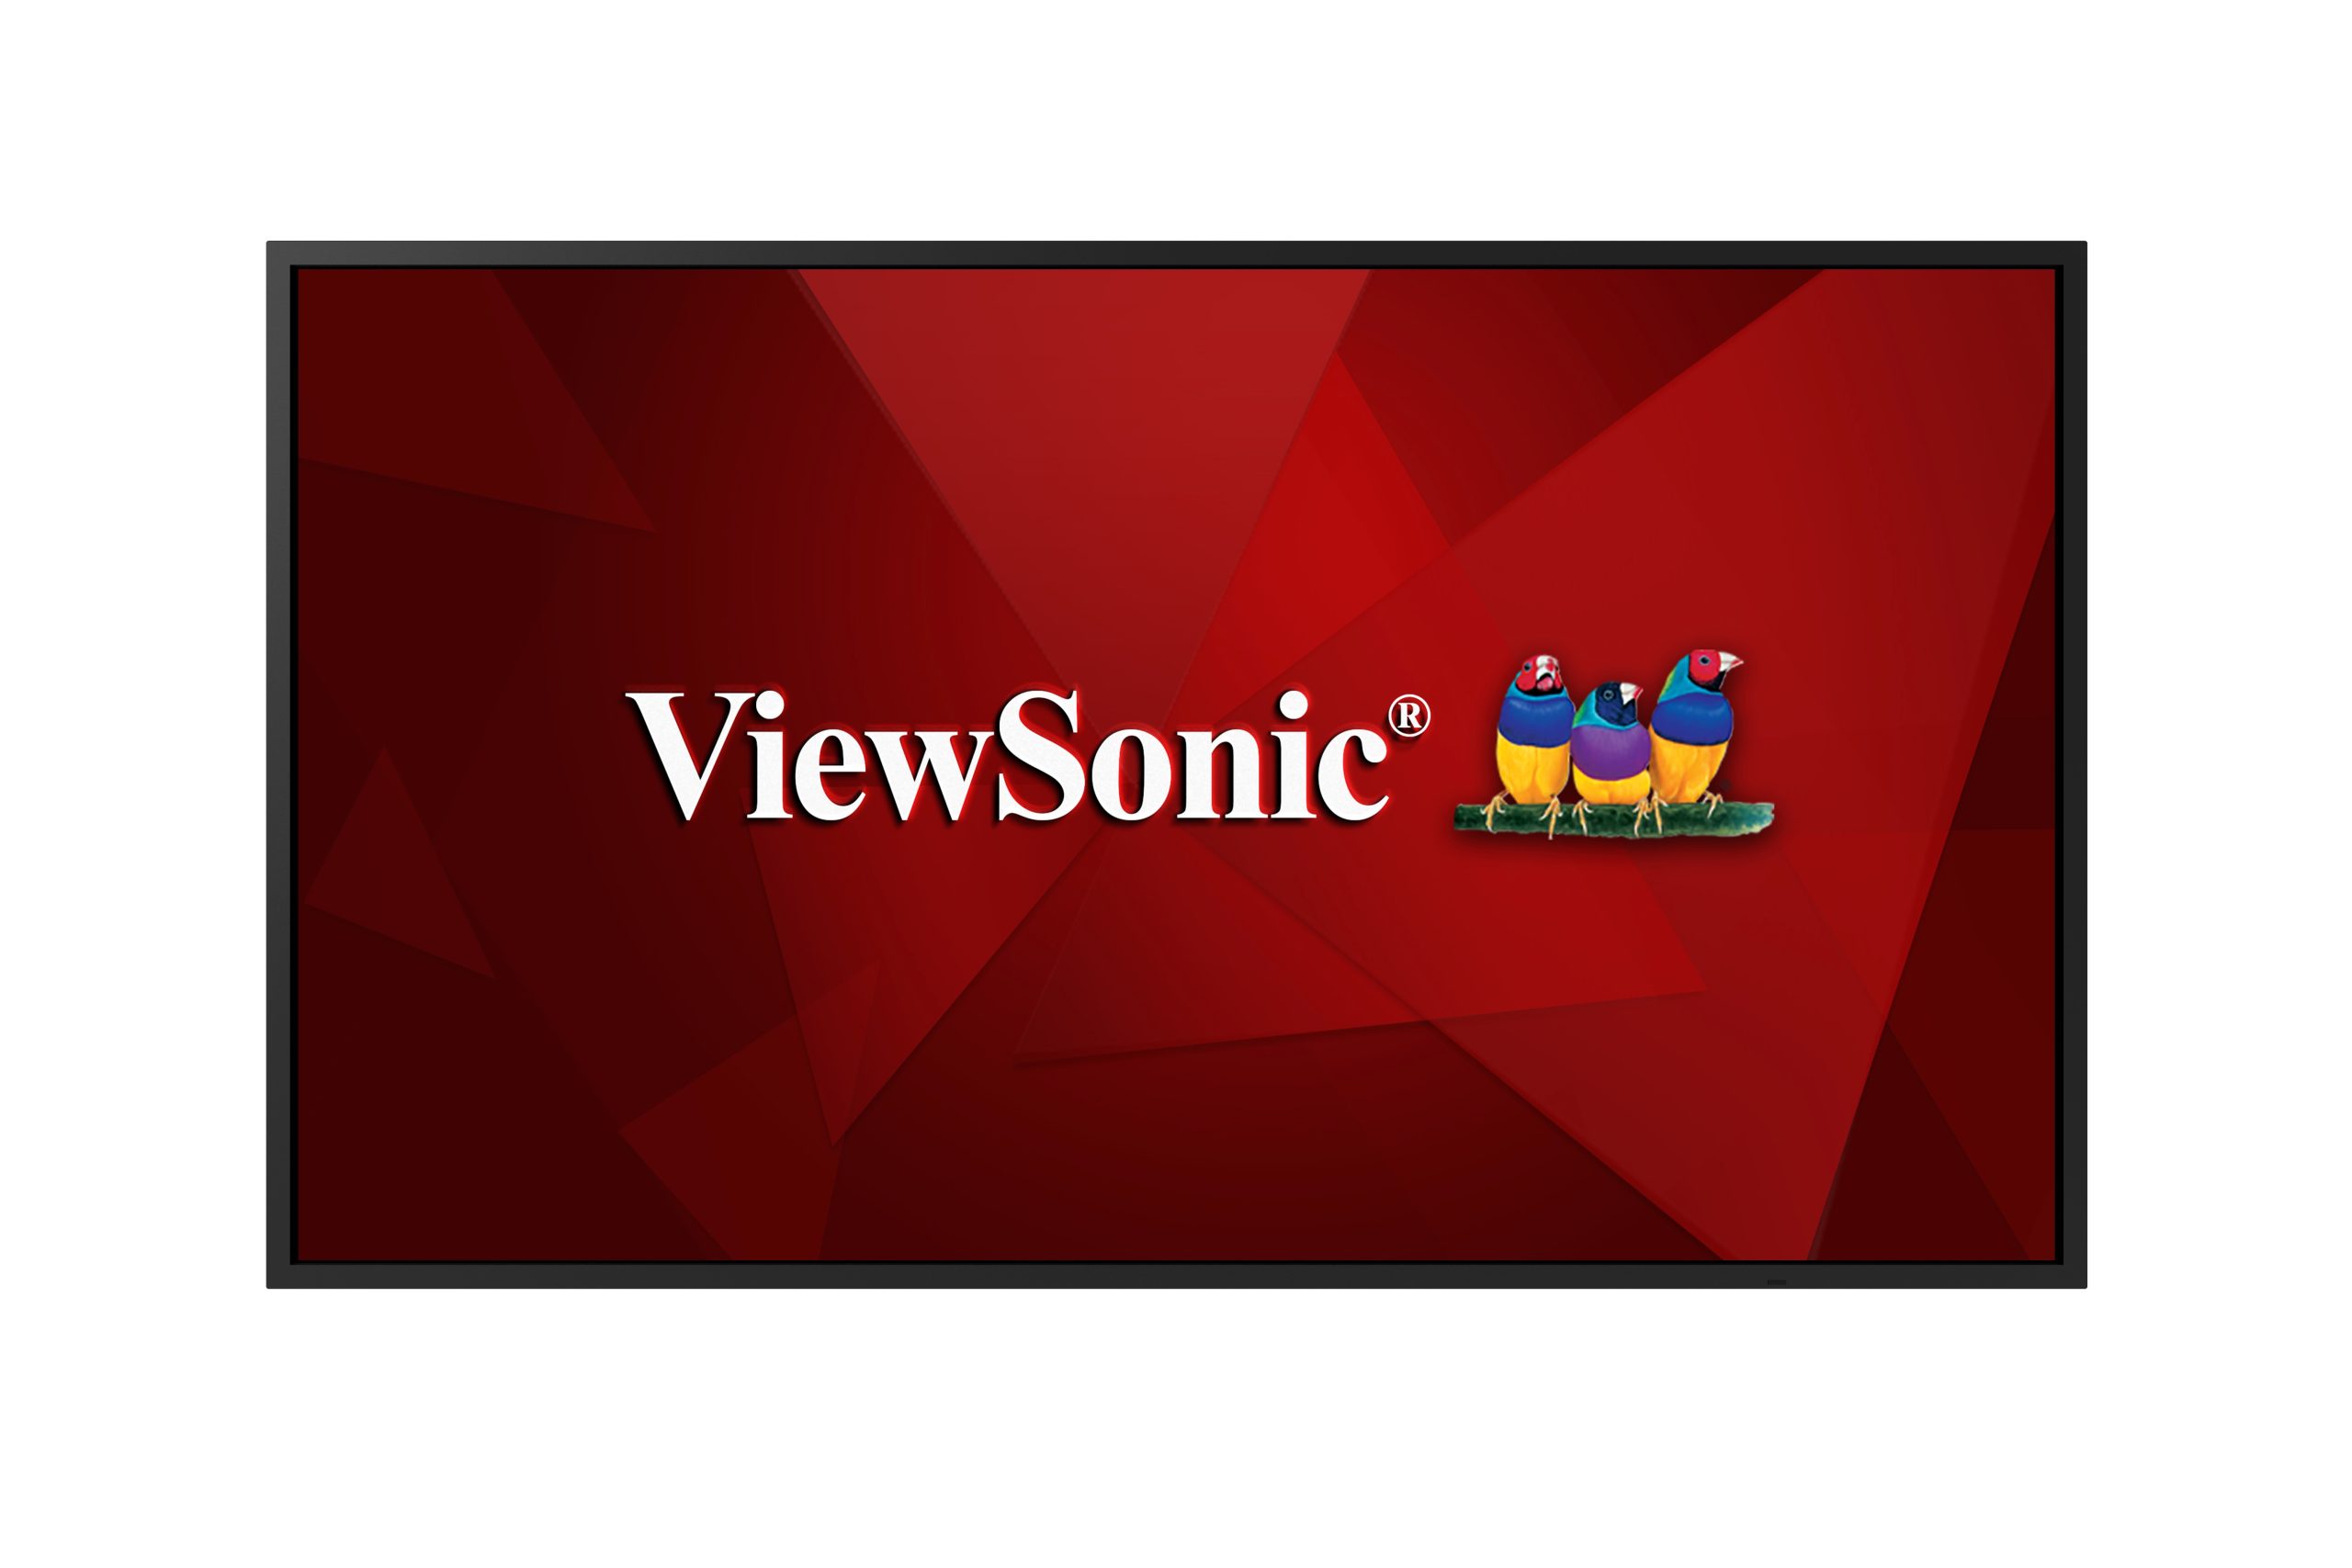 ViewSonic Commercial Display